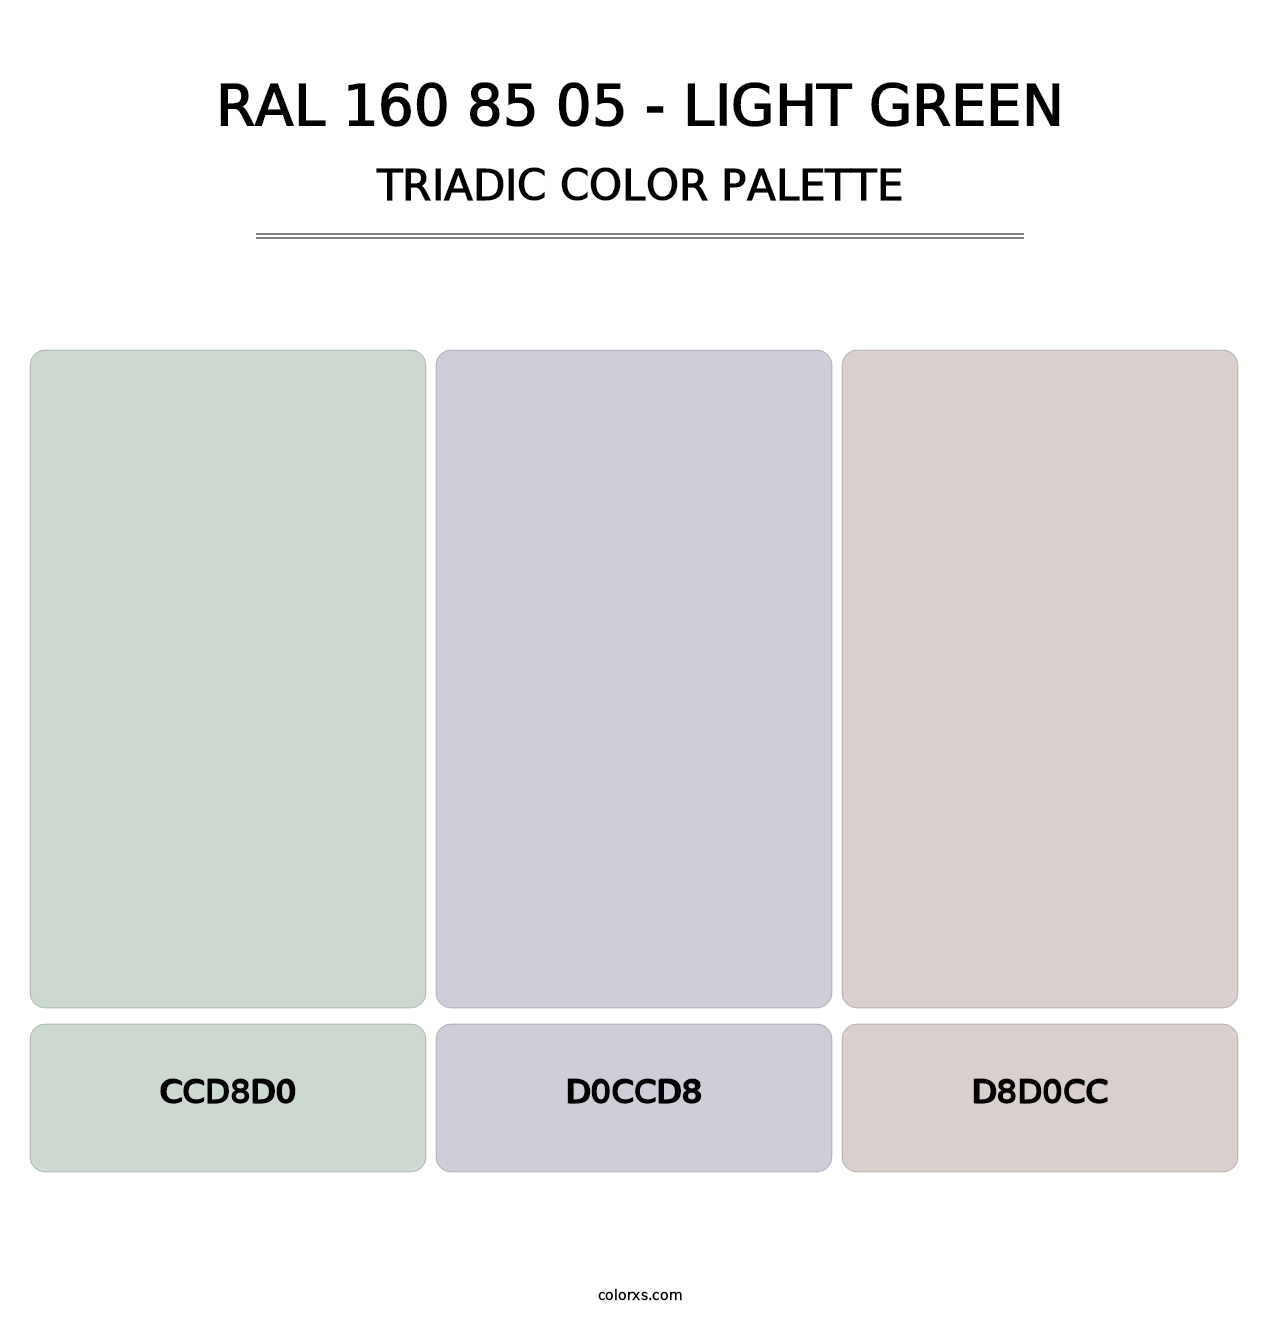 RAL 160 85 05 - Light Green - Triadic Color Palette